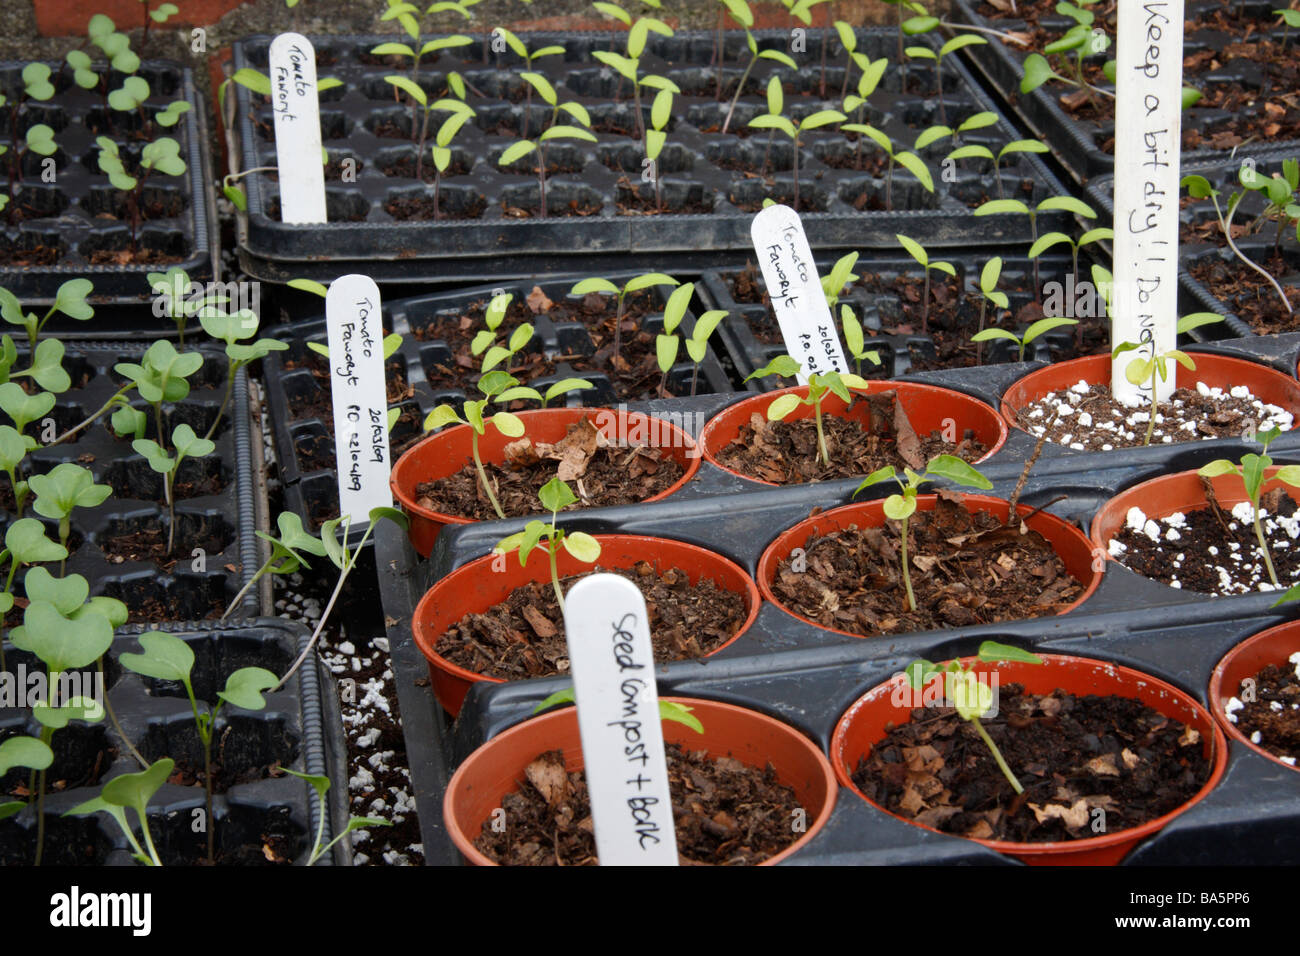 Trays and pots of tomato and vegetable seedlings Stock Photo